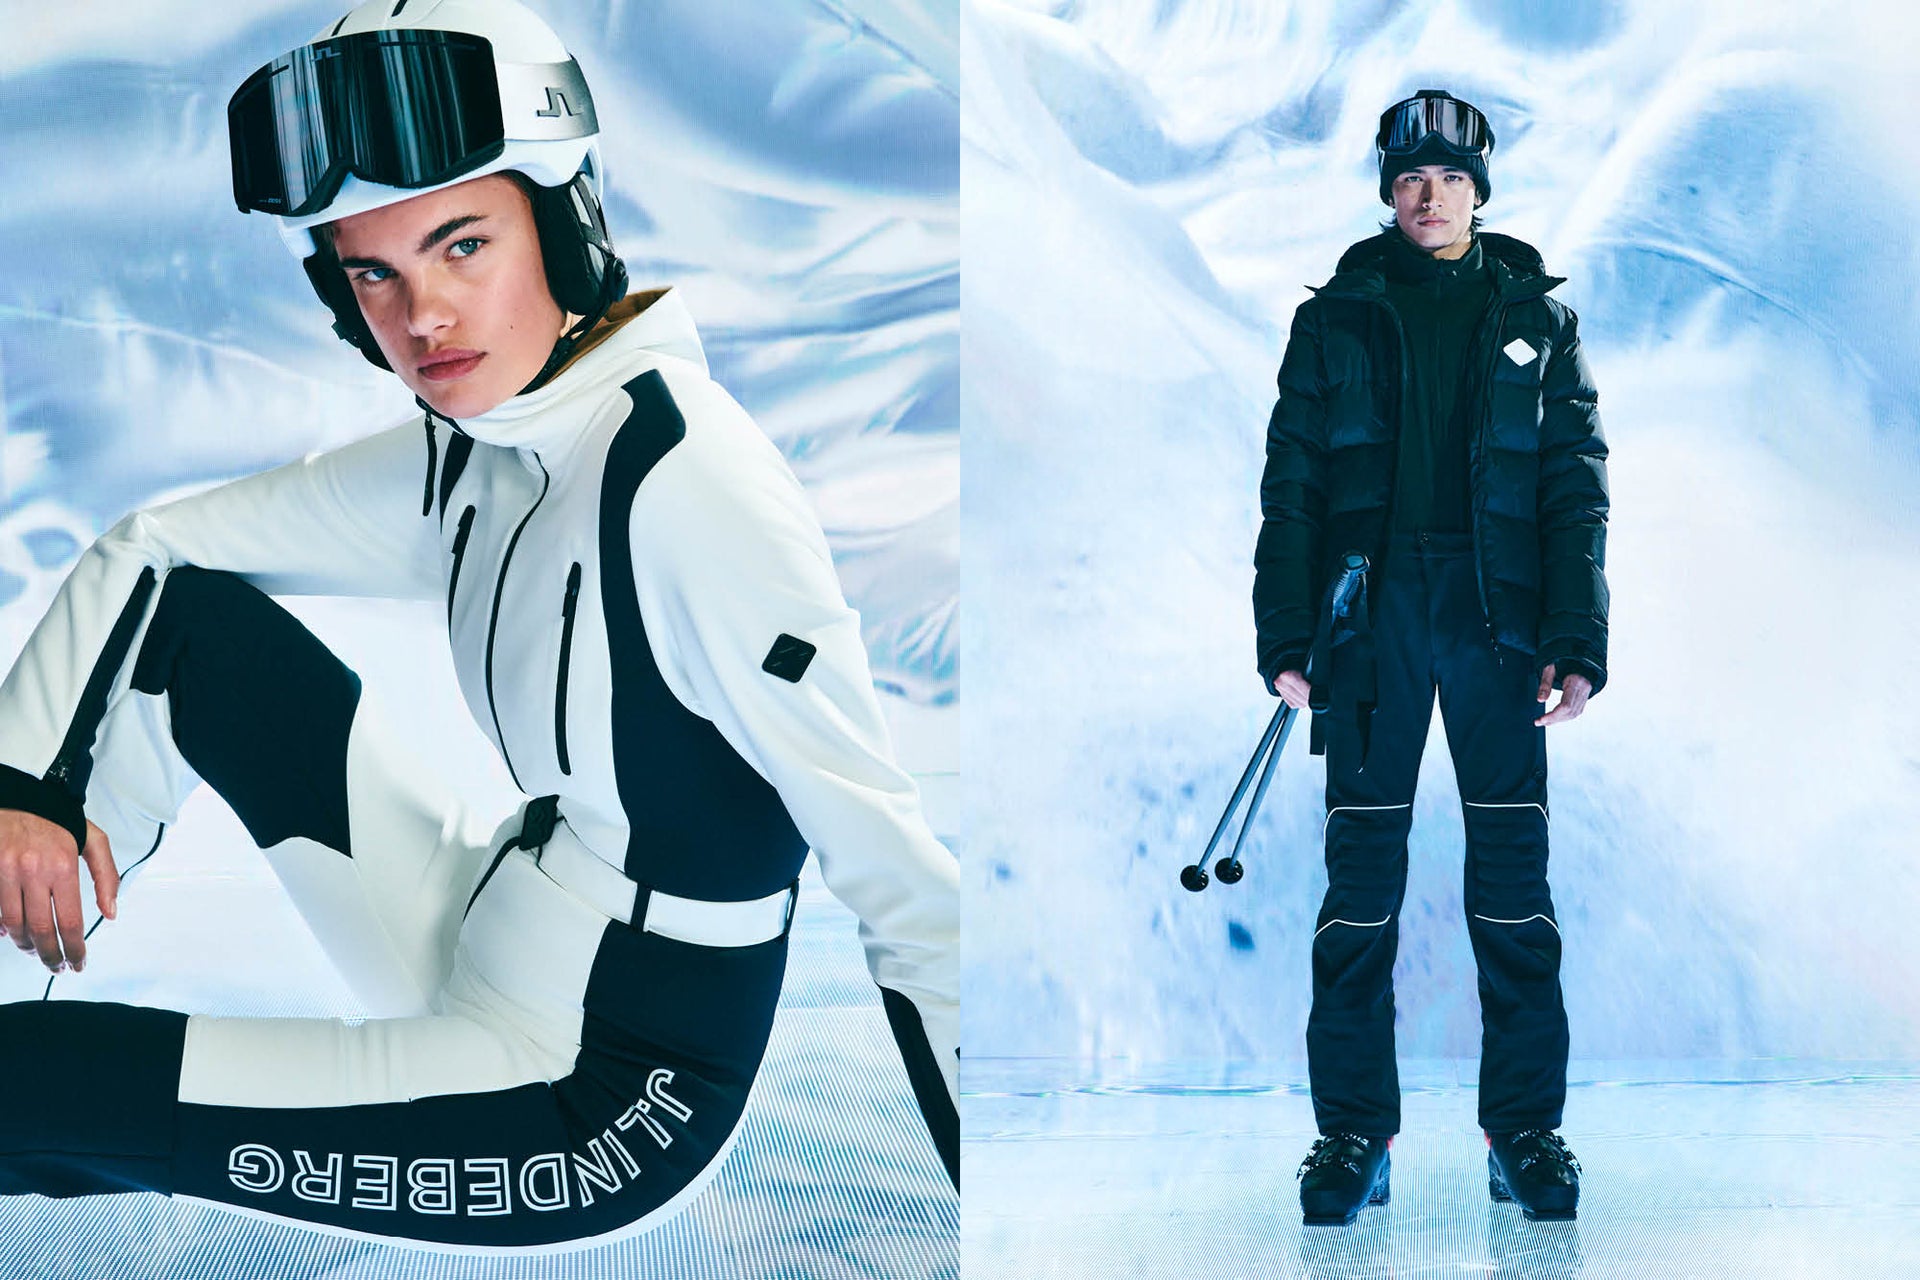 25 Chic Ski Outfits To Wear On The Slopes  Skioutfit damen, Ski-outfit,  Schnee mode